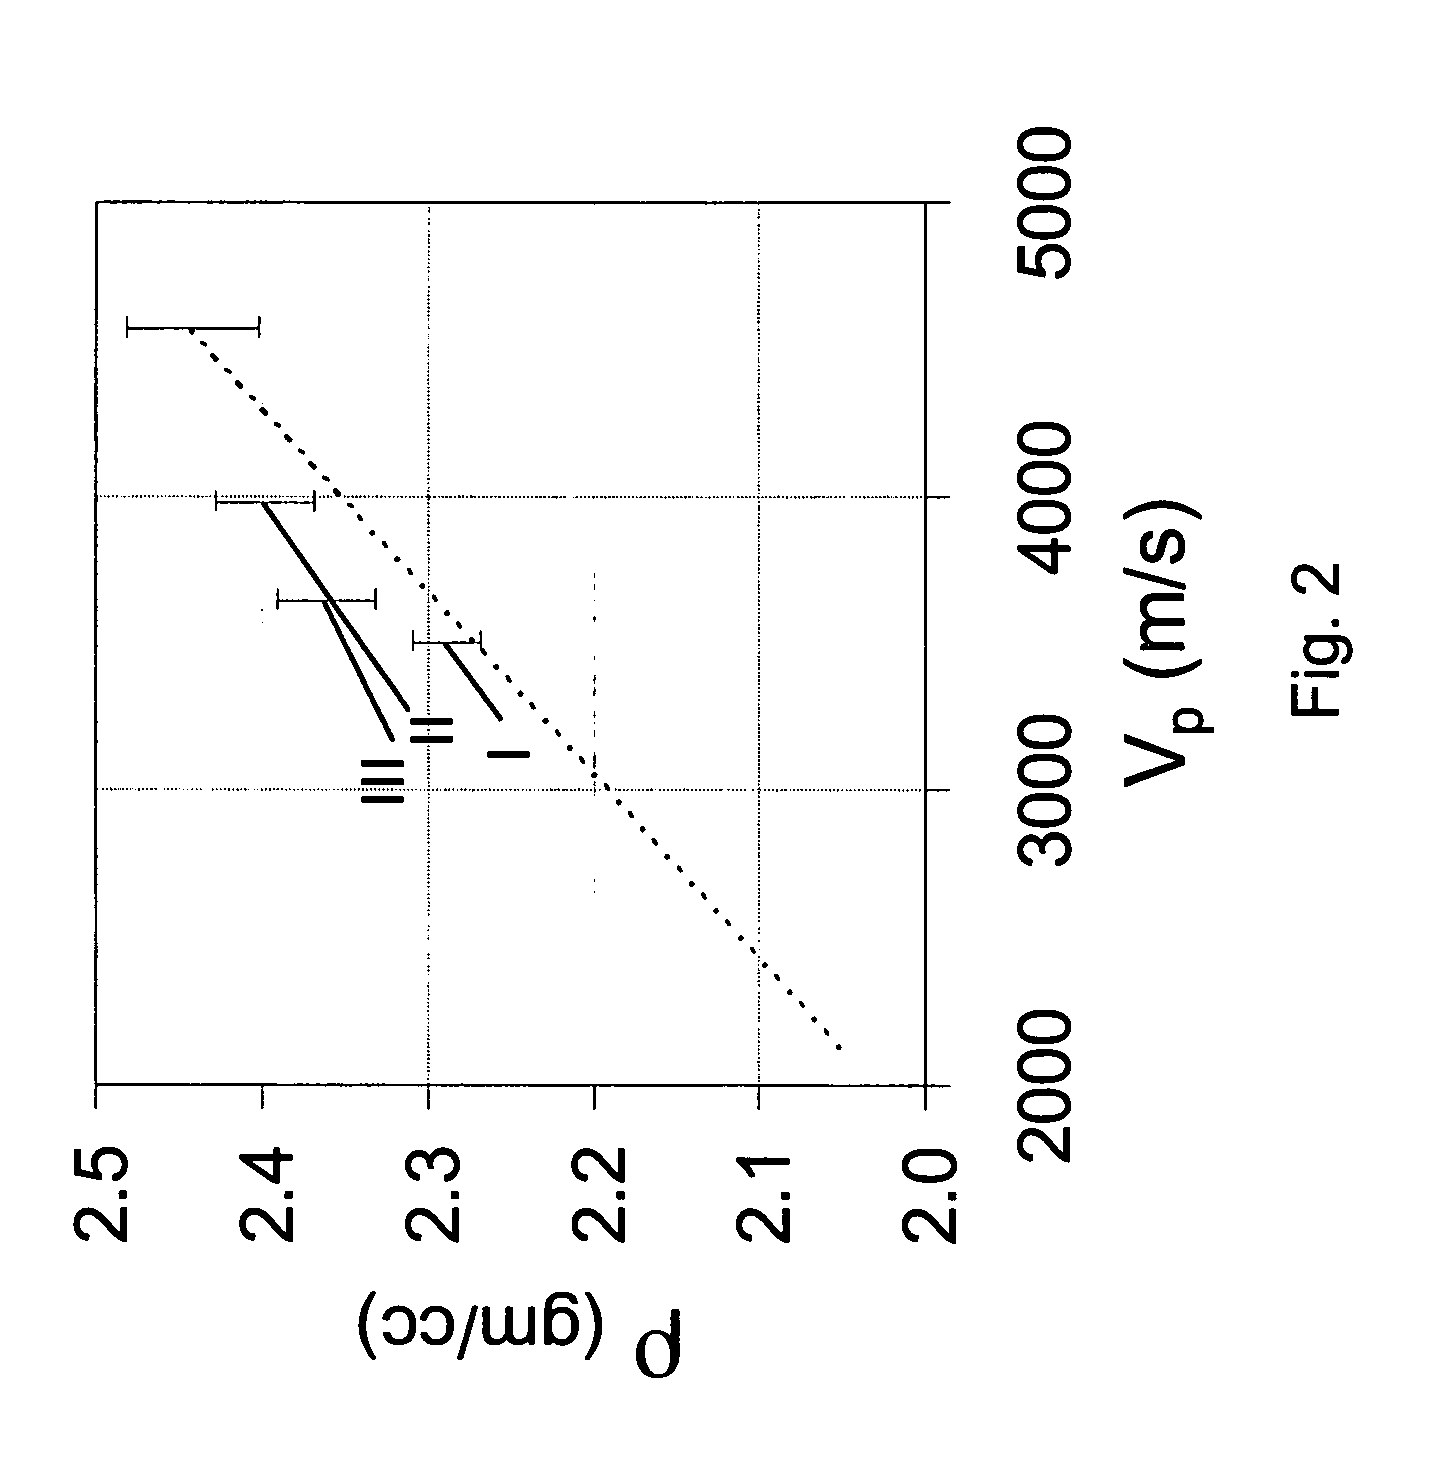 Method for improving prediction of the viability of potential petroleum reservoirs